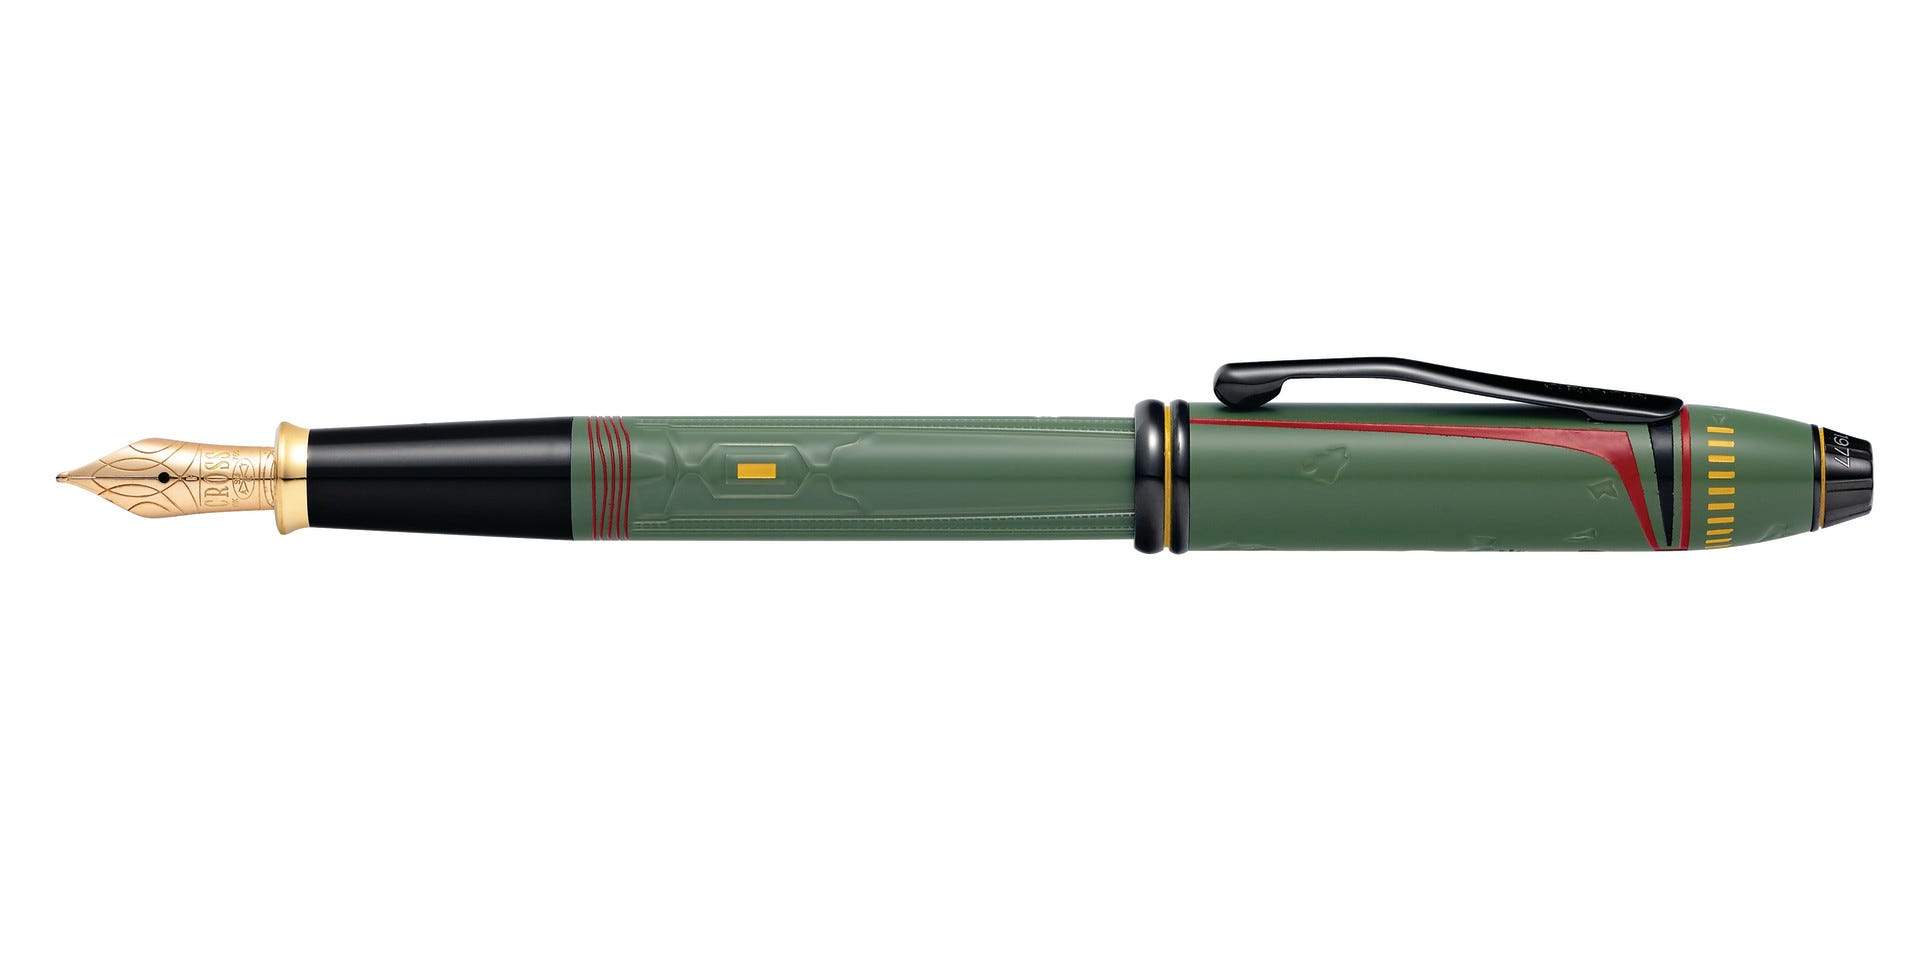 CROSS TOWNSEND STAR WARS LIMITED EDITION BOBAFETT FOUNTAIN PEN IN A GIFT BOX - AT0046D-51MD